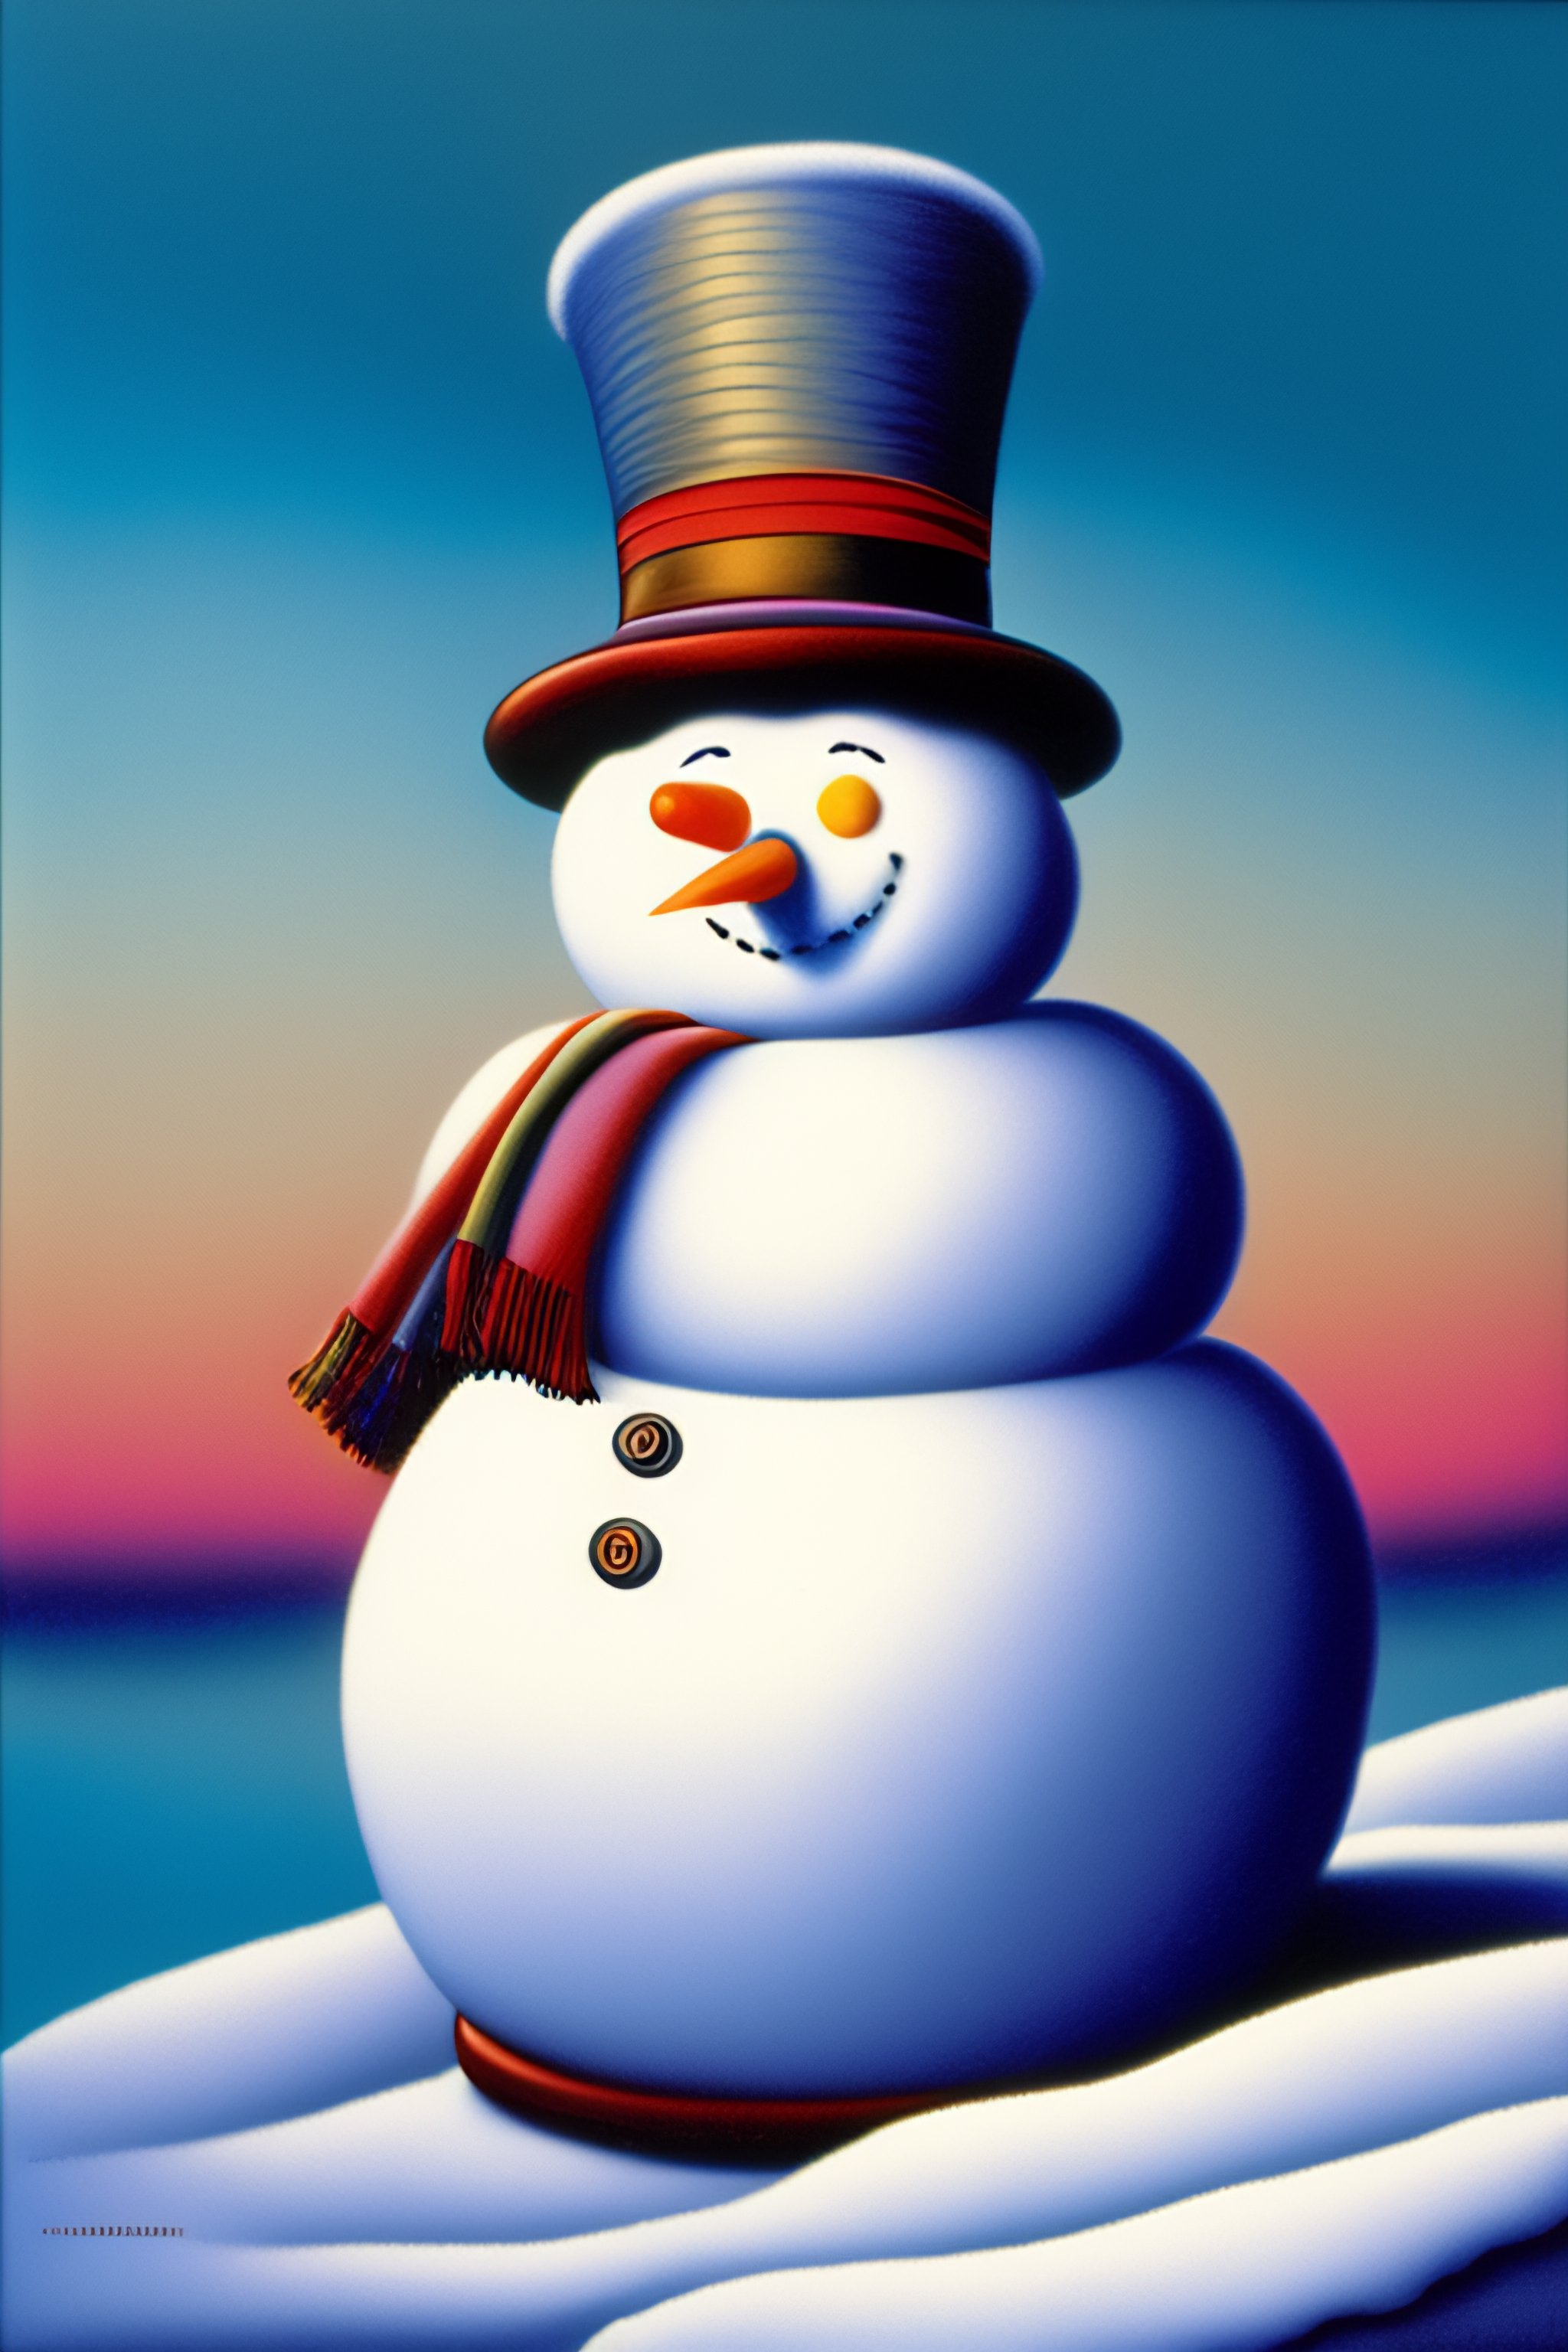 The Snowman is a 1982 British animated television film pastels, crayons on celluloid